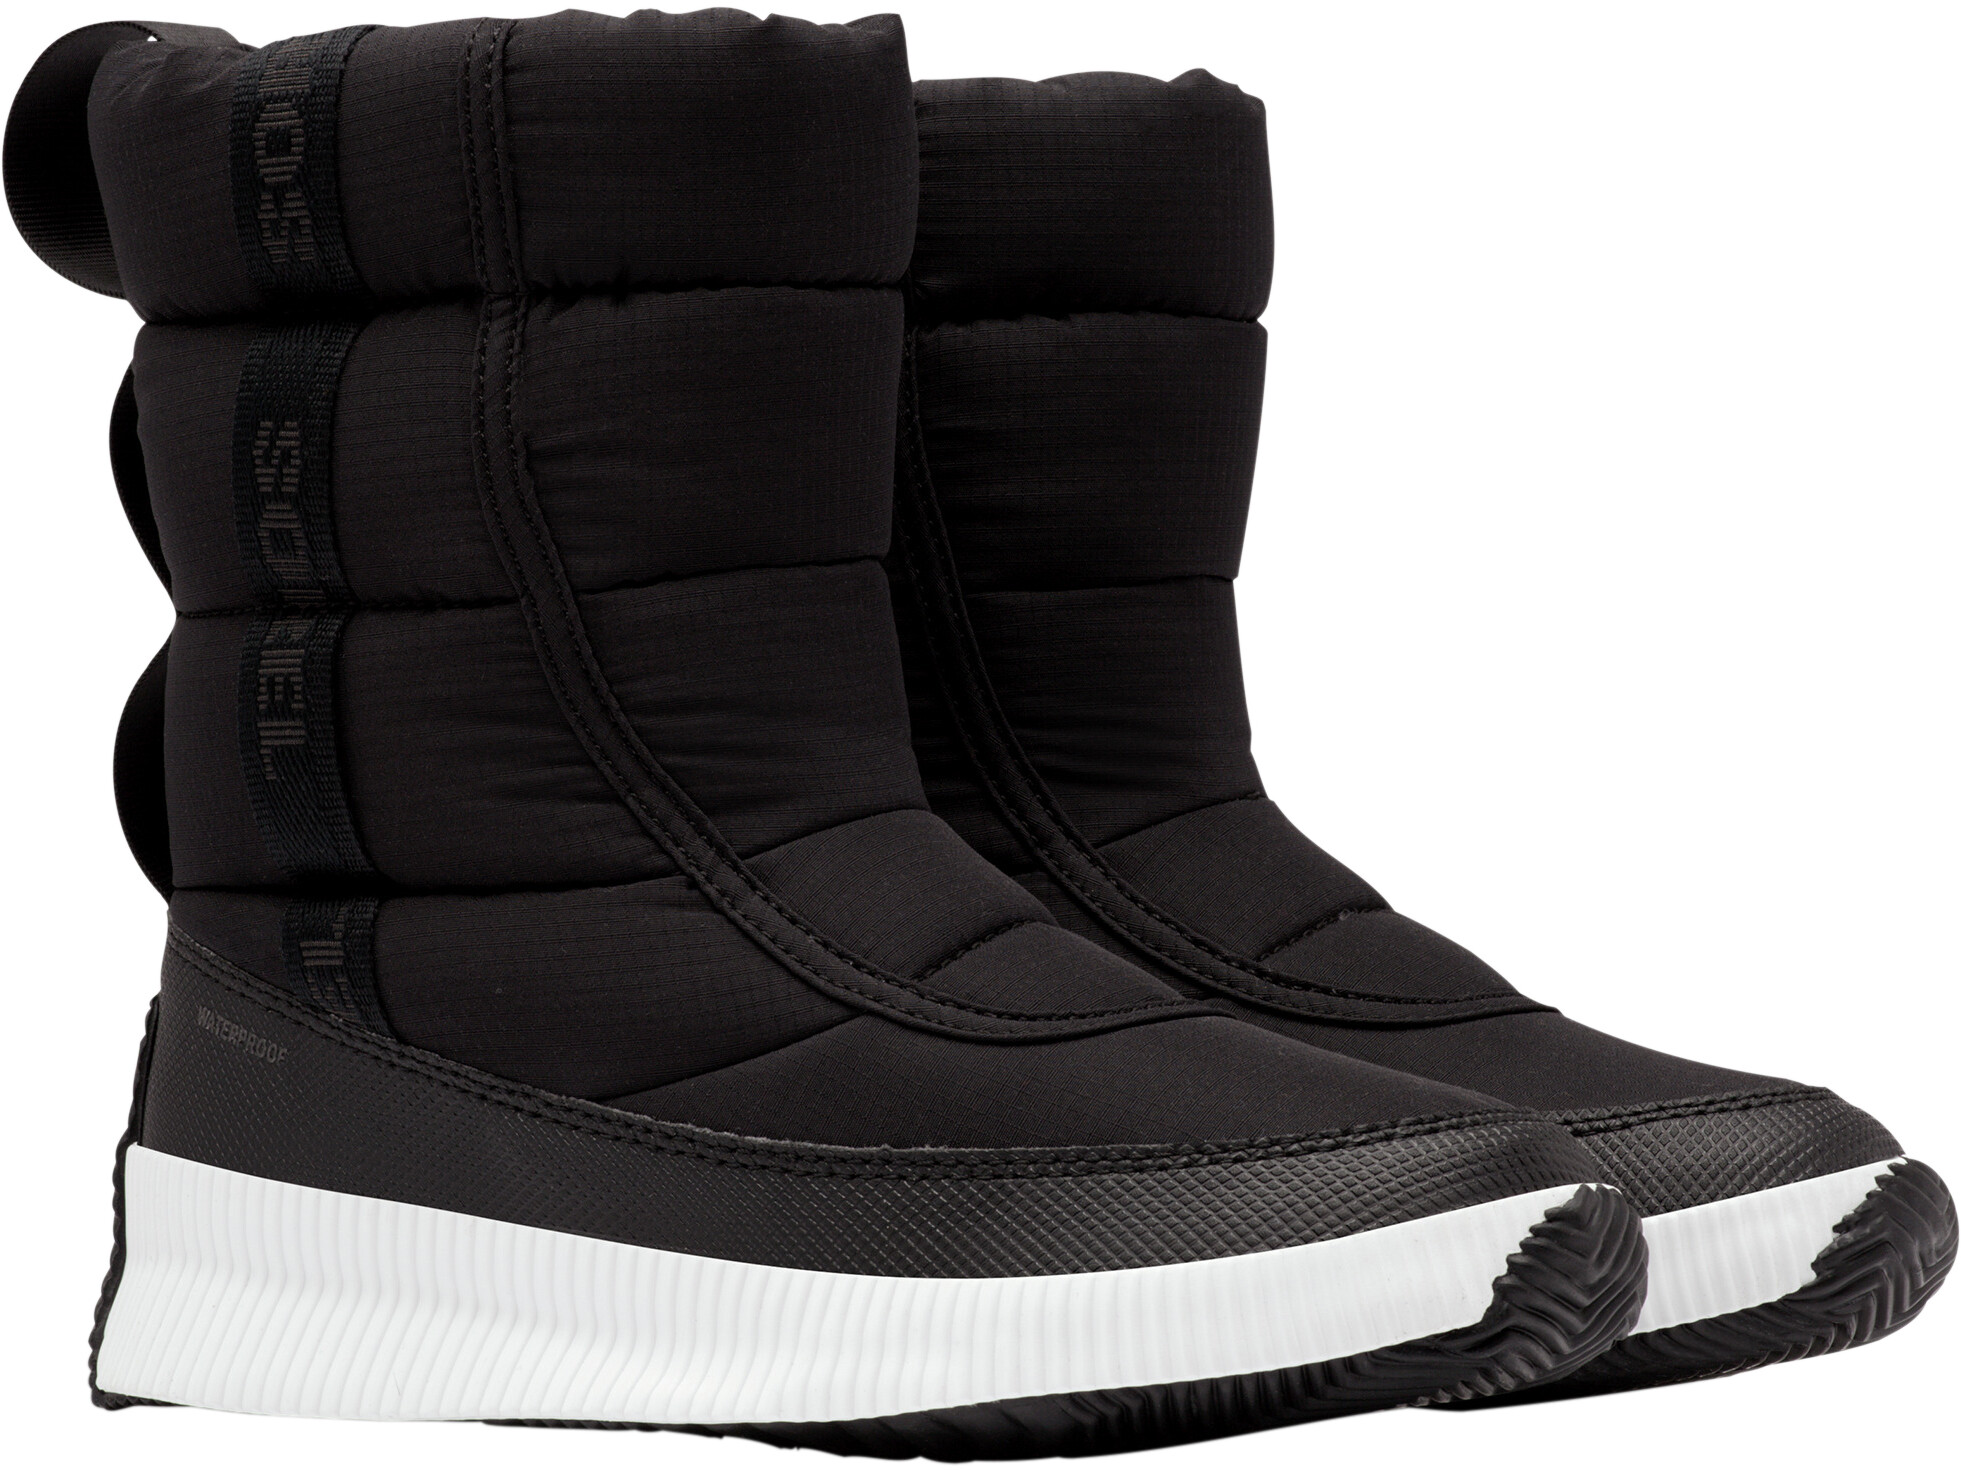 Sorel Out N About Puffy Mid Boots Women black at addnature.co.uk